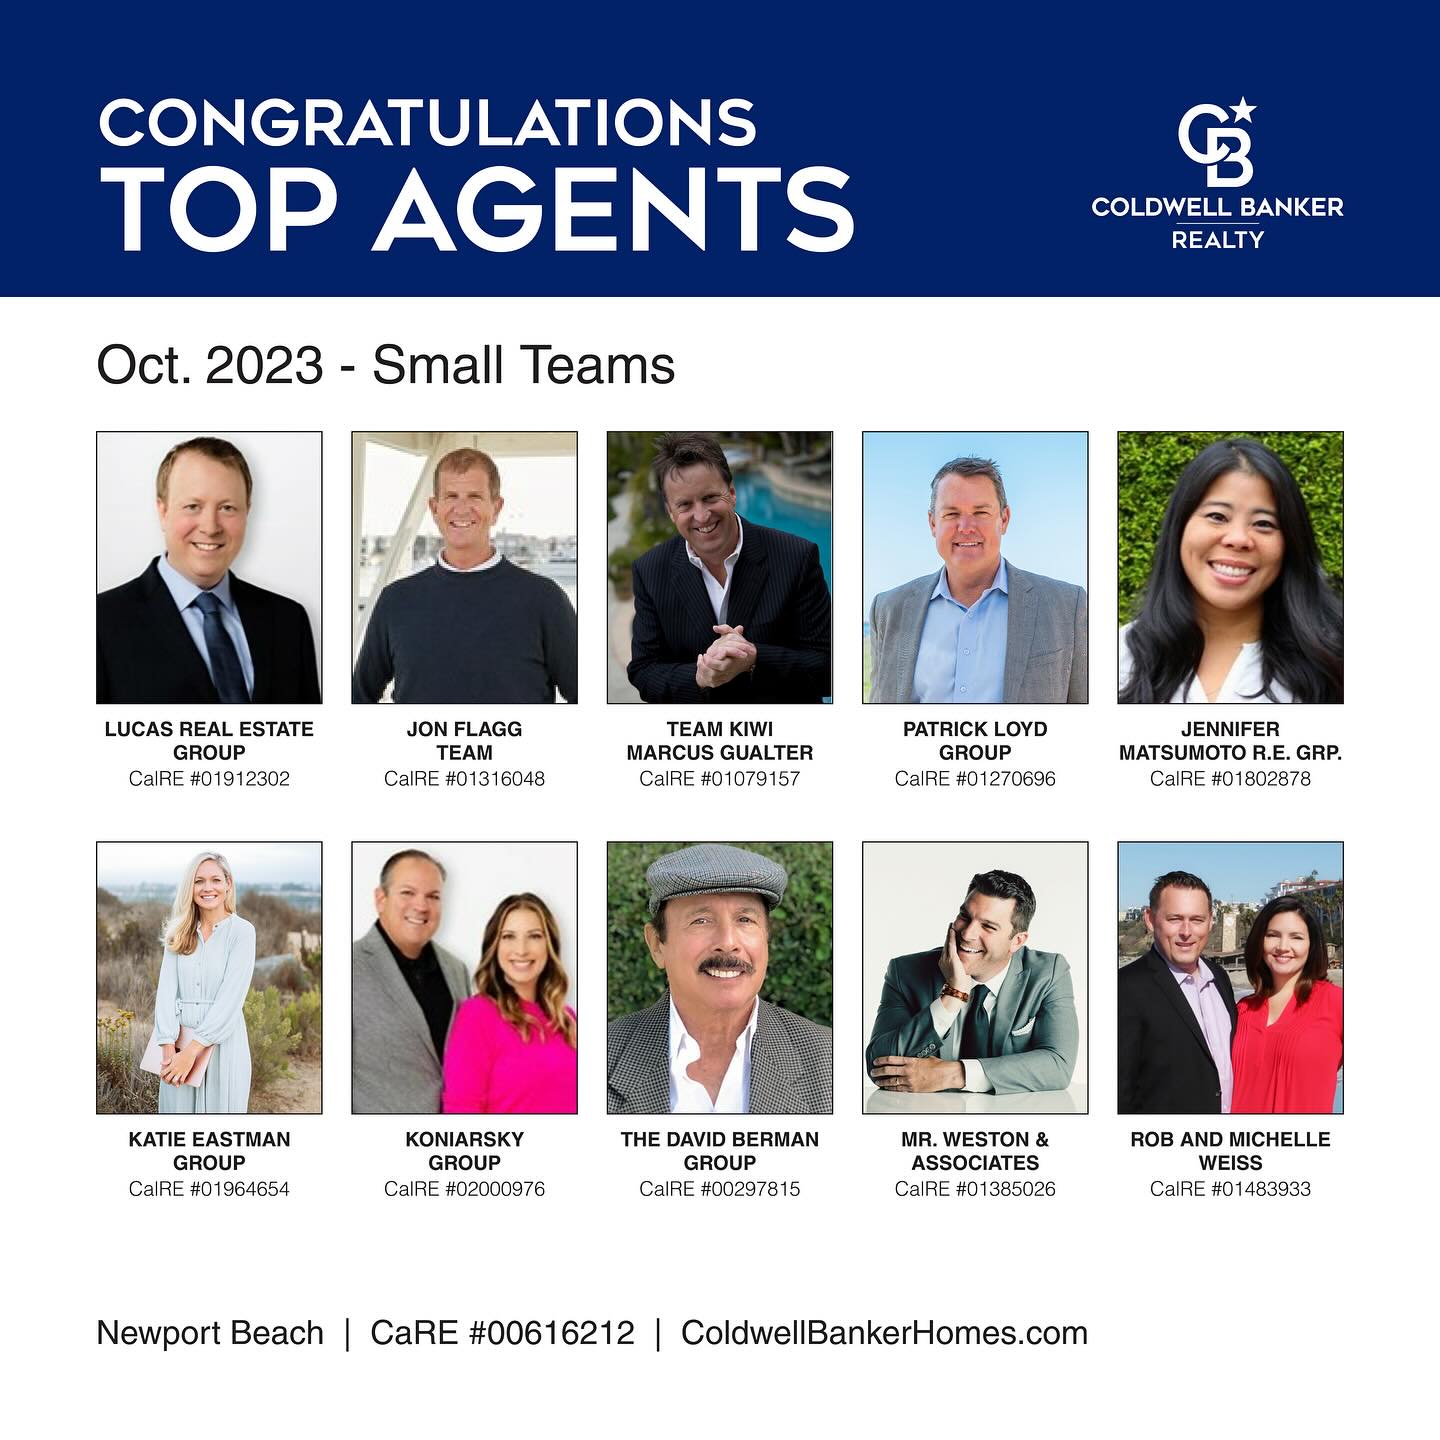 Lucas Real Estate Group Claims Top Spot at Coldwell Banker’s Newport Beach Office